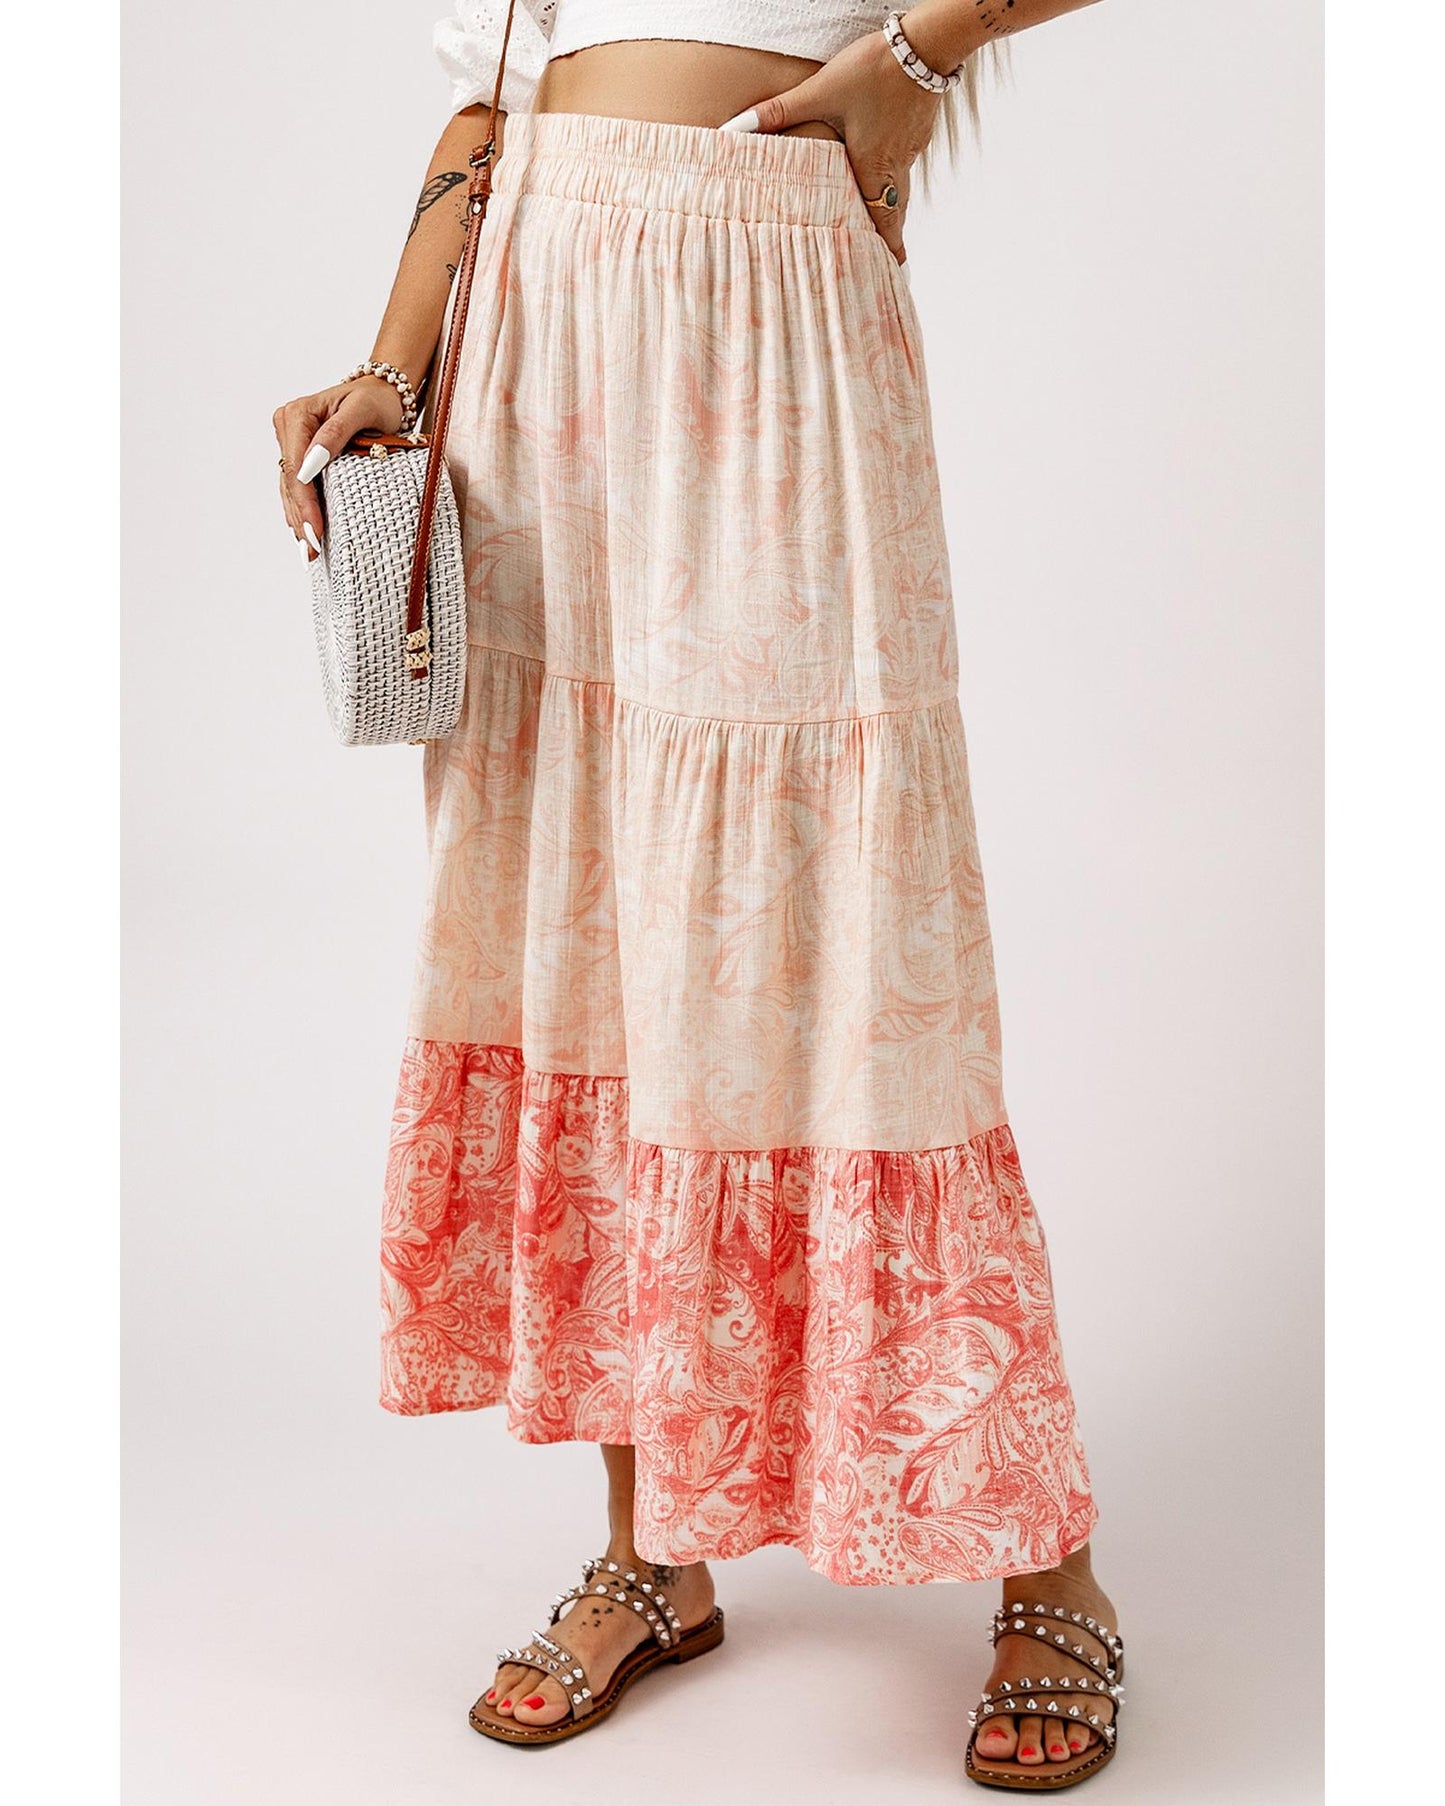 Azura Exchange Tiered Maxi Skirt with Floral Print - L